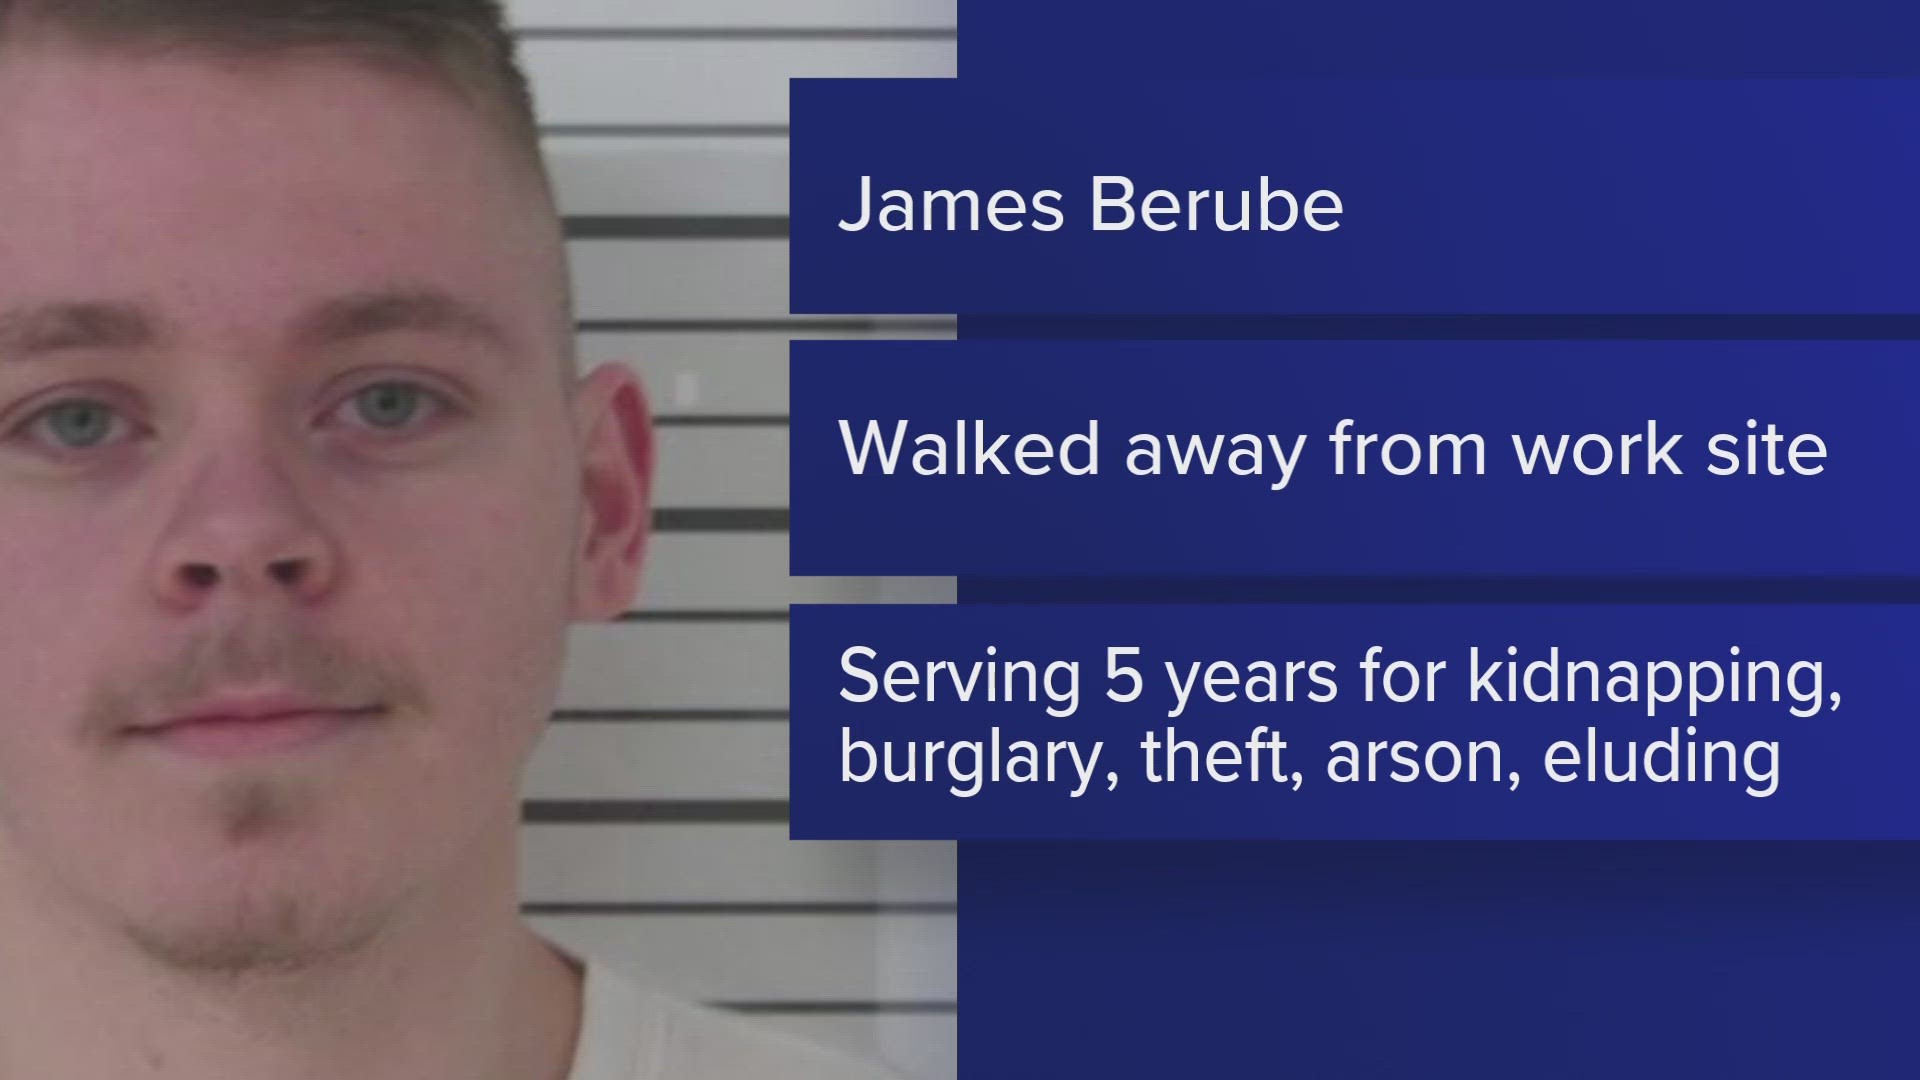 James Berube was placed into custody after a seven-hour standoff with police at a Pleasant Point residence.